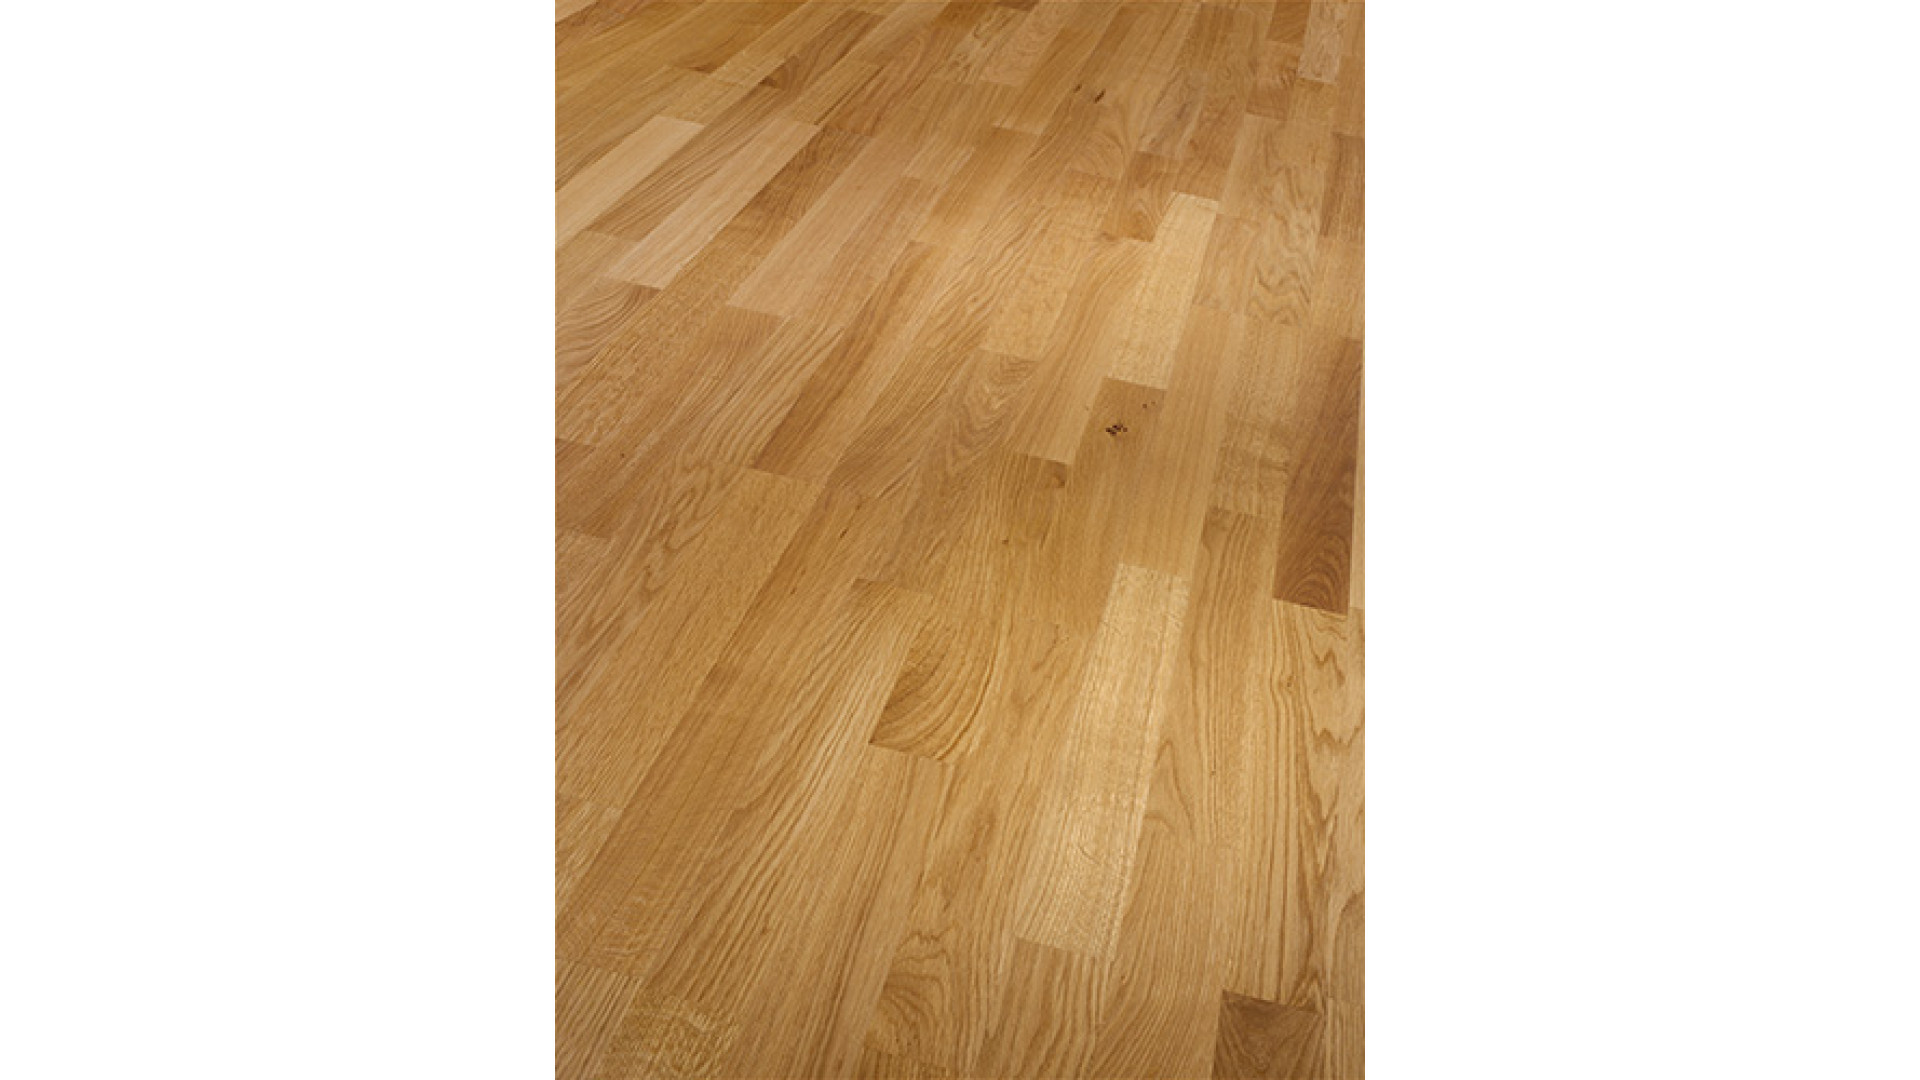 3 SECTION STAFF NATURAL HARDWOOD on sale only $41.75